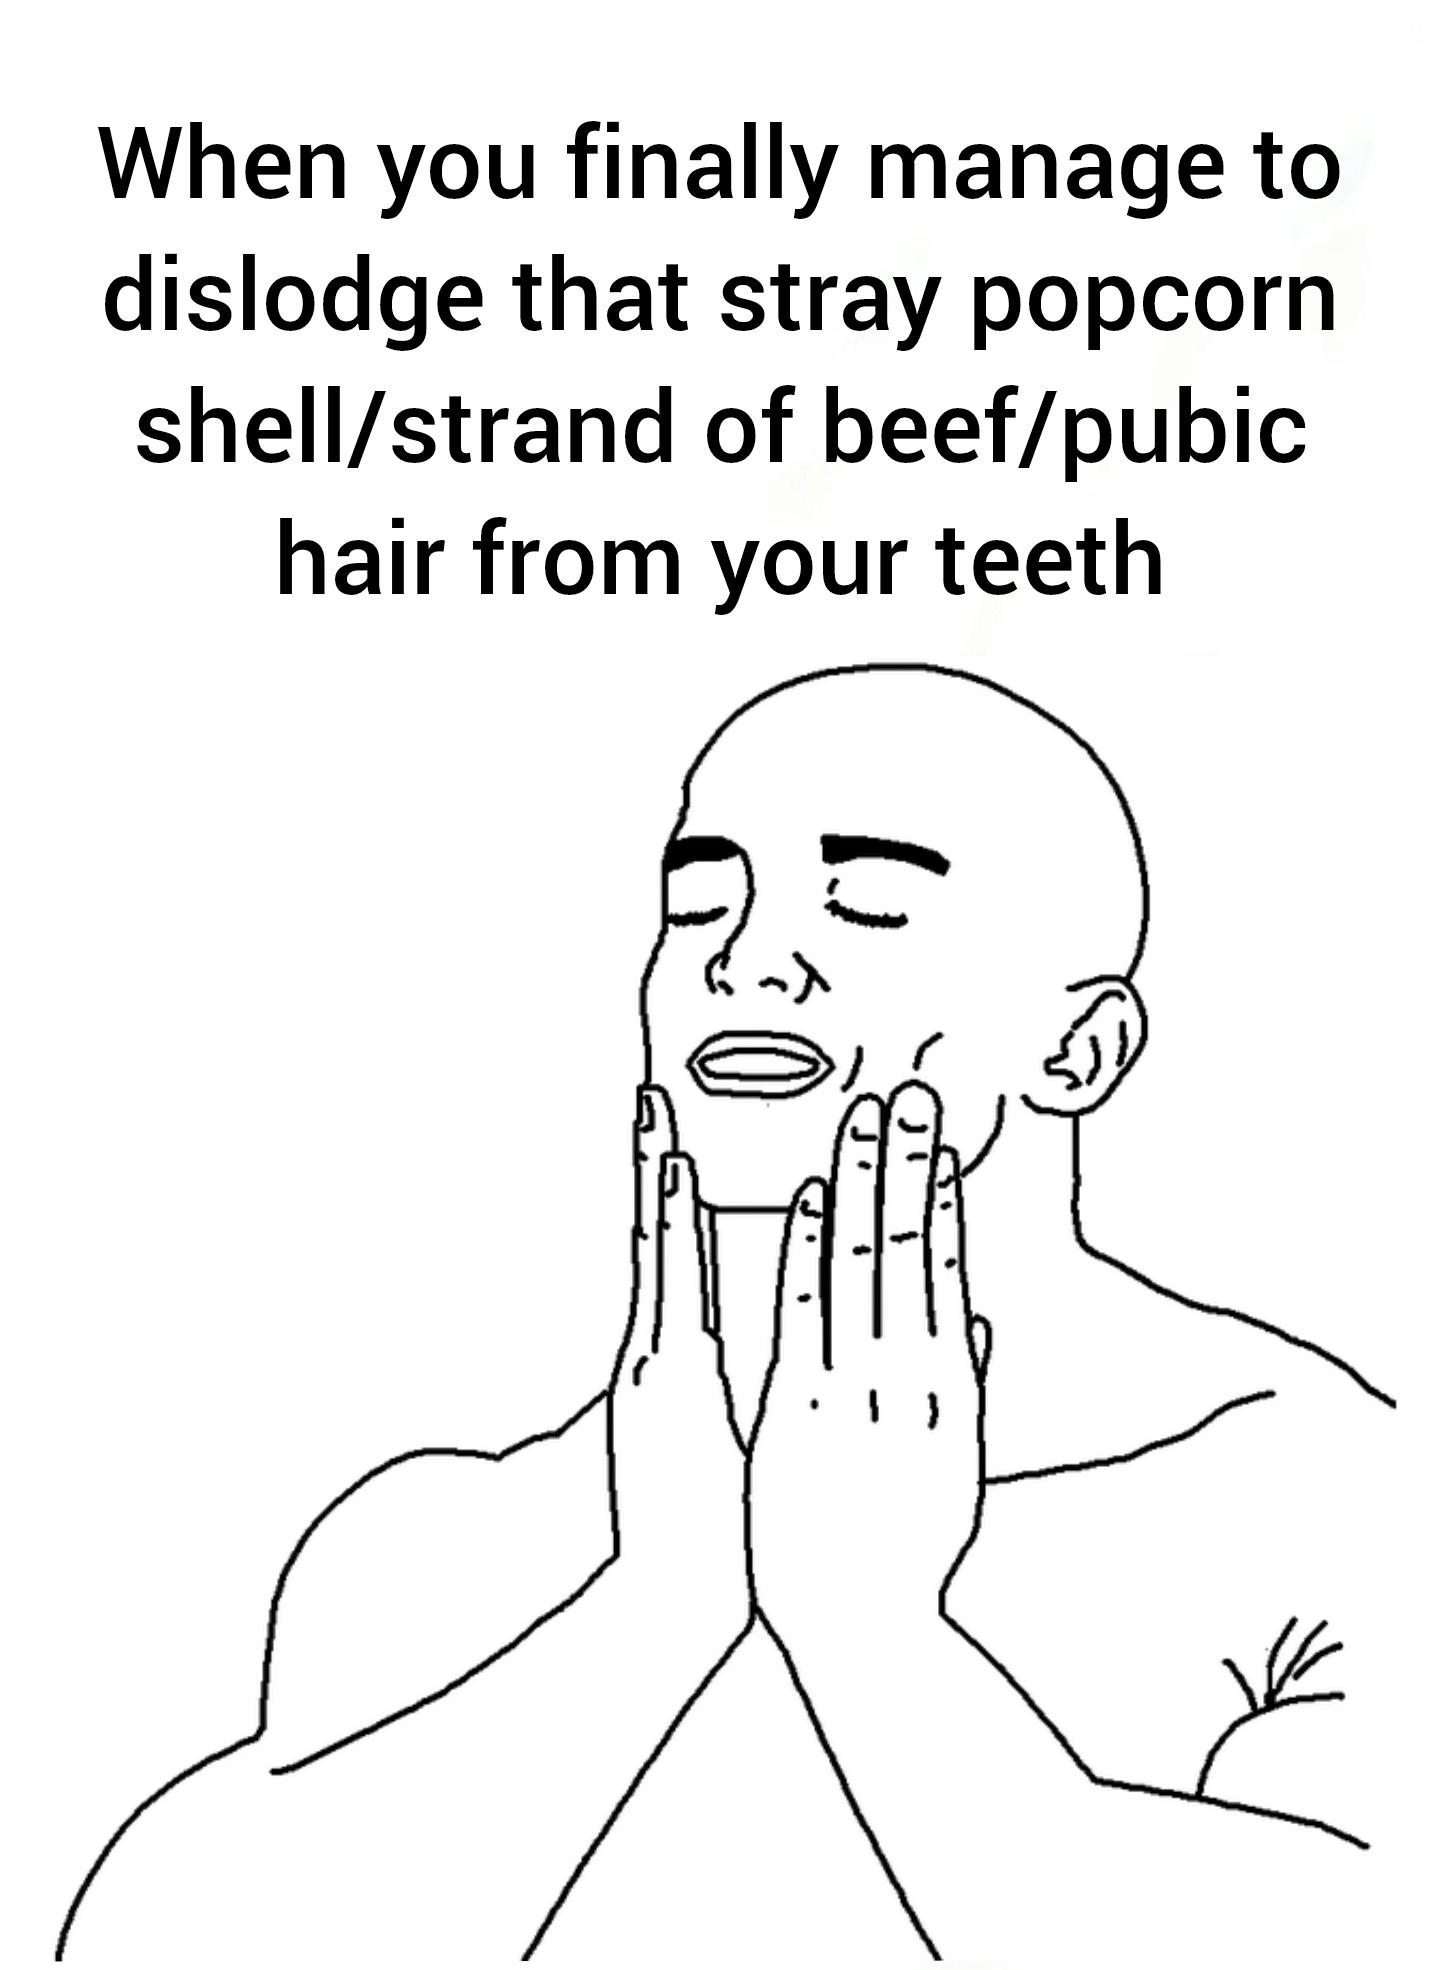 funny memes -  Internet meme - When you finally manage to dislodge that stray popcorn shellstrand of beefpubic hair from your teeth